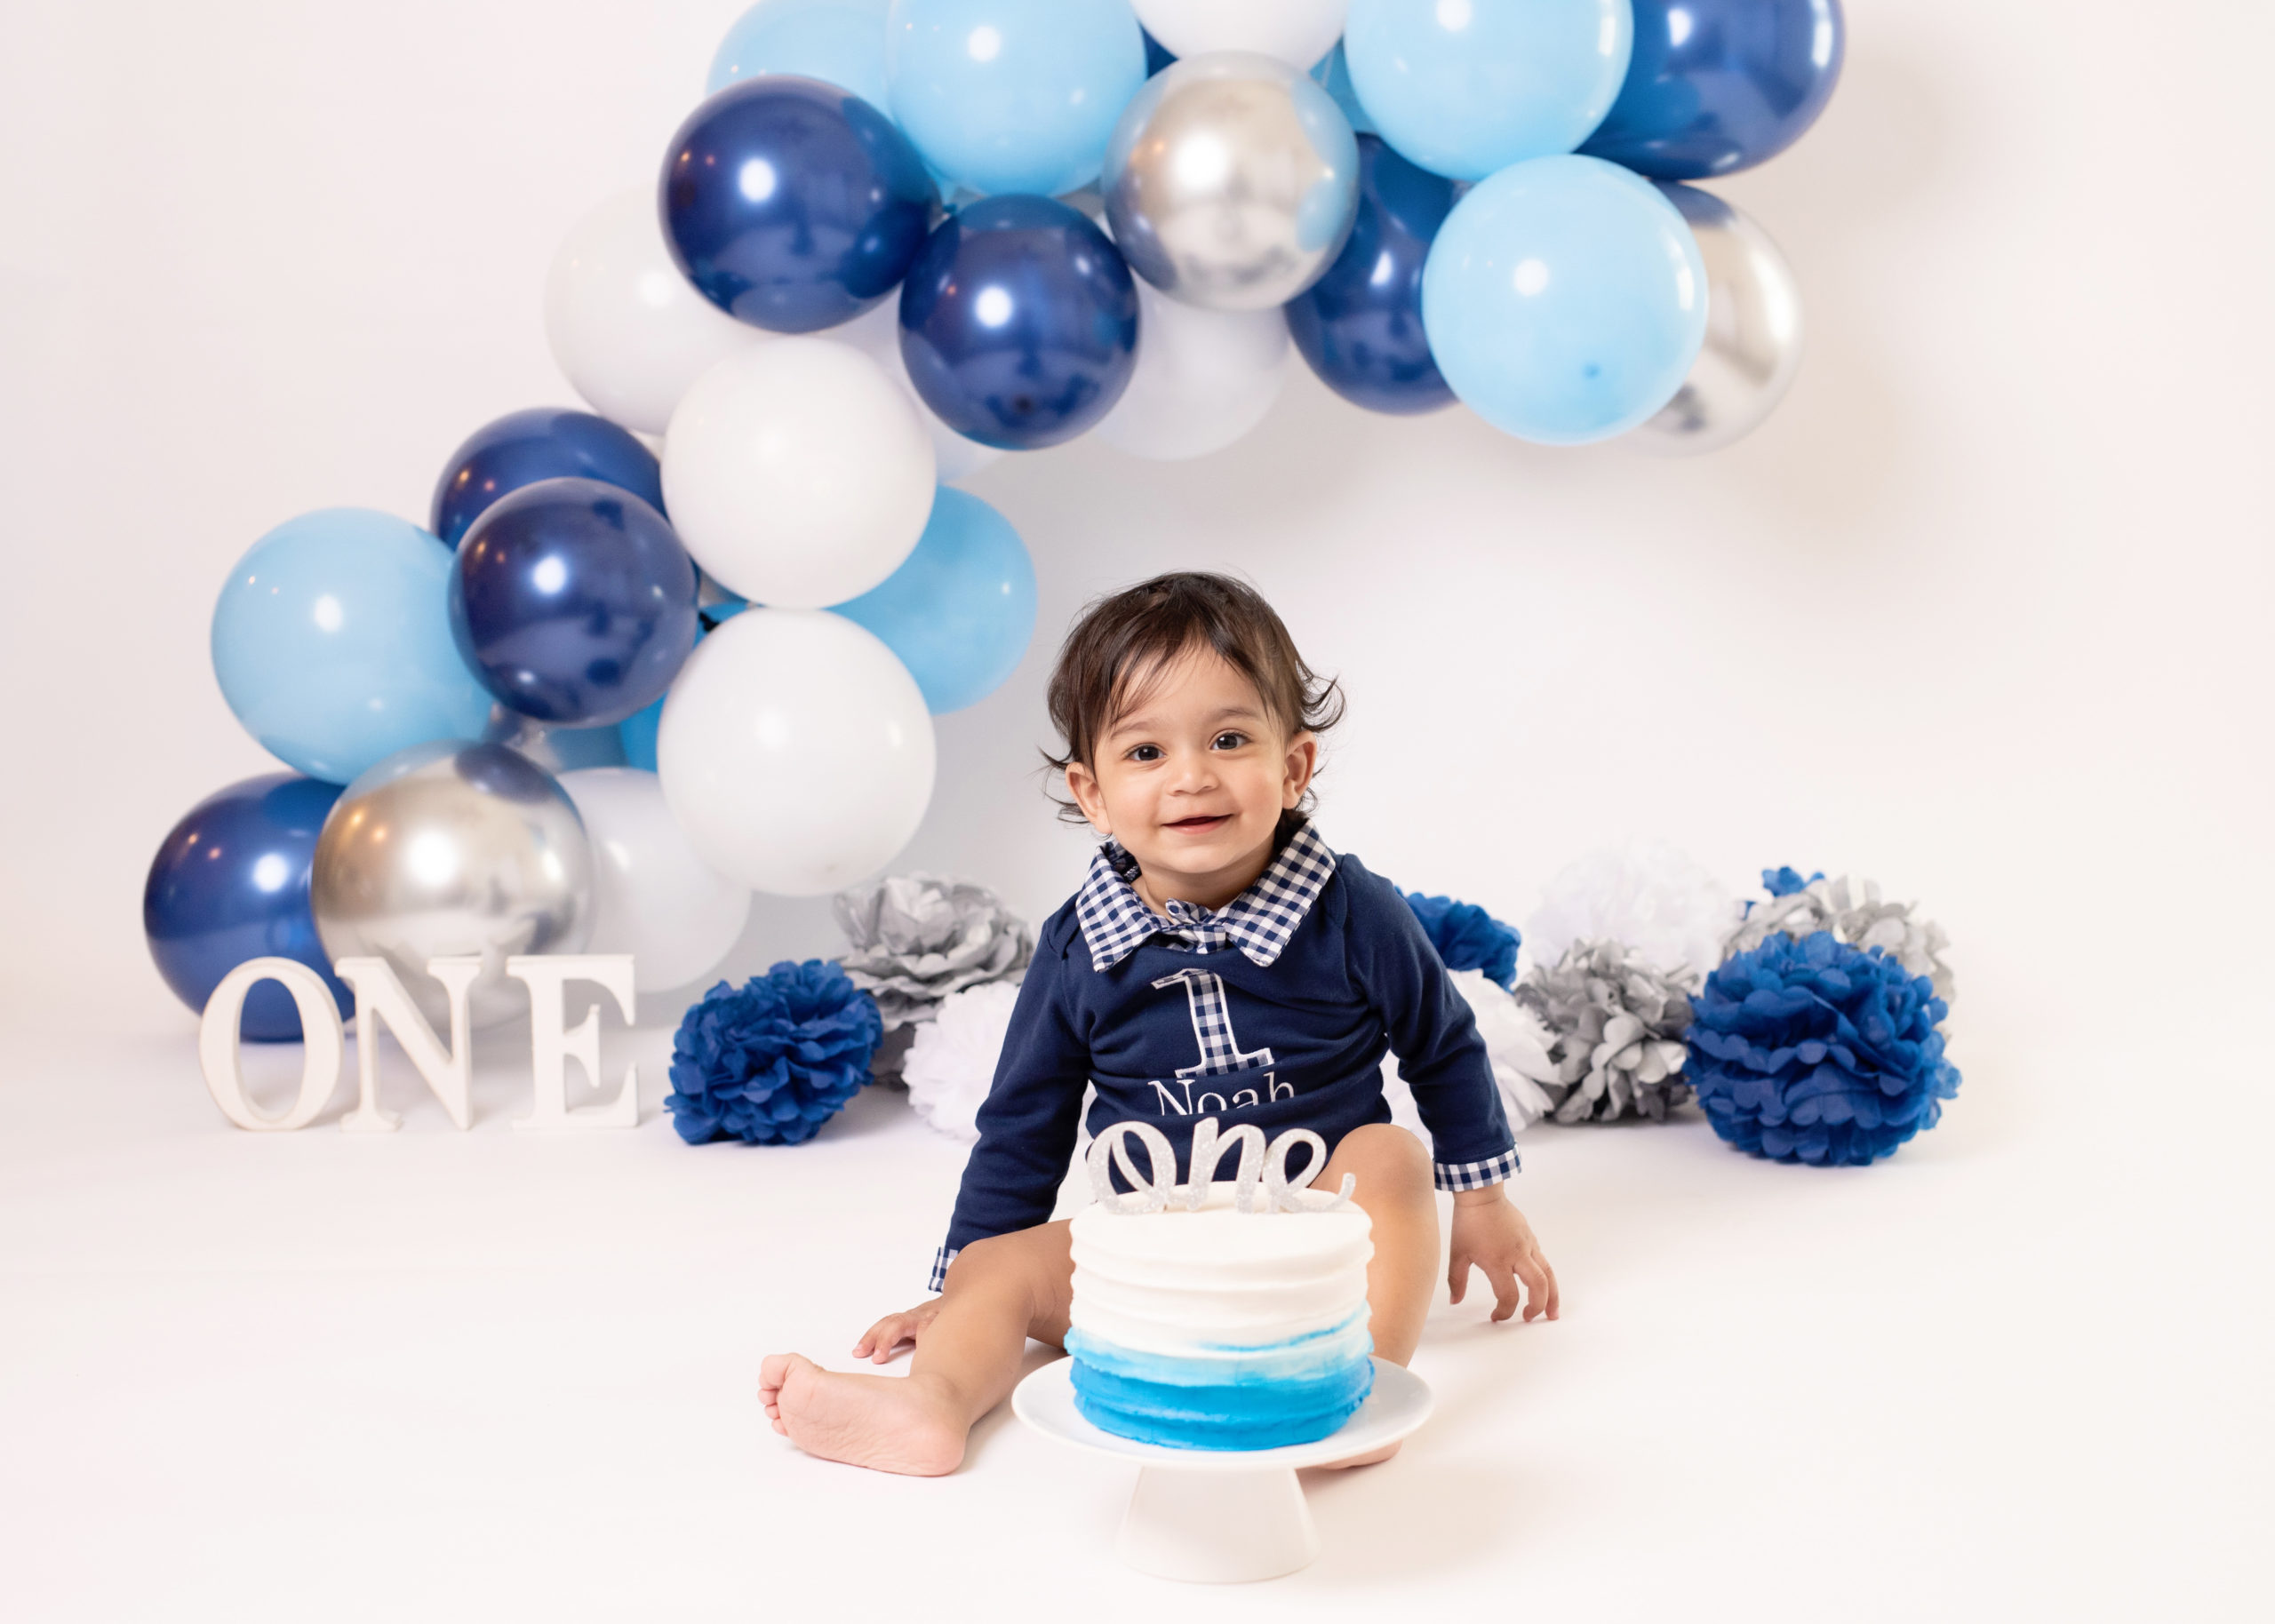 little boy in blue outfit celebrating his first birthday The growing place webster tx